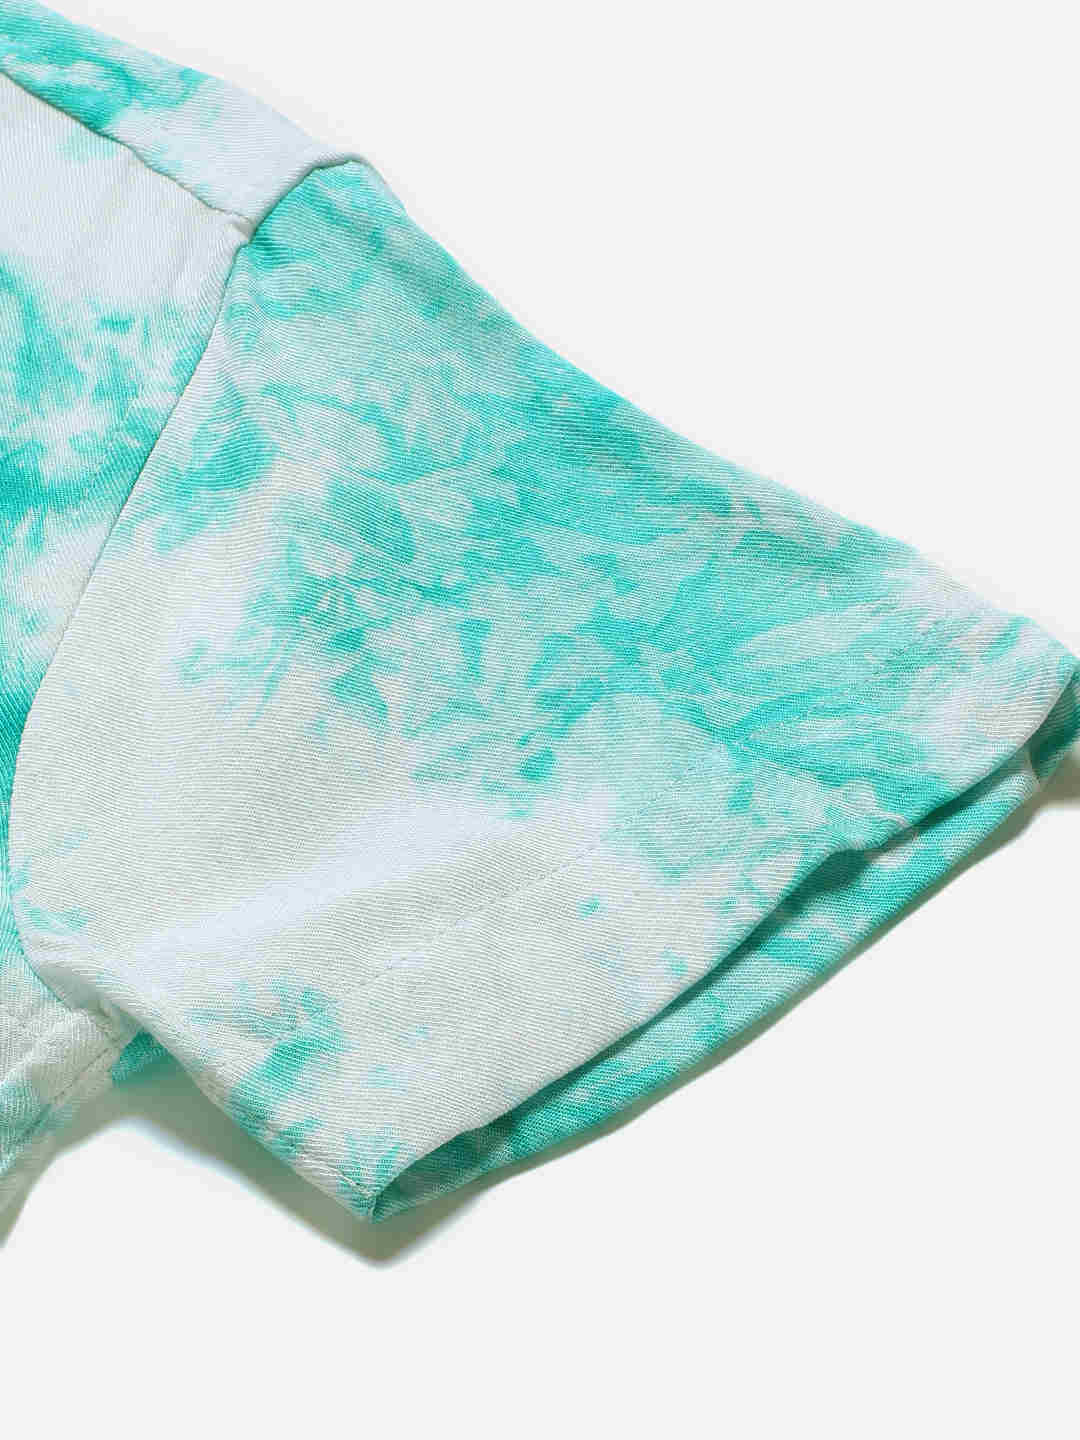 Premium Turquoise and White Tie Dye Slim Fit Rayon Shirt